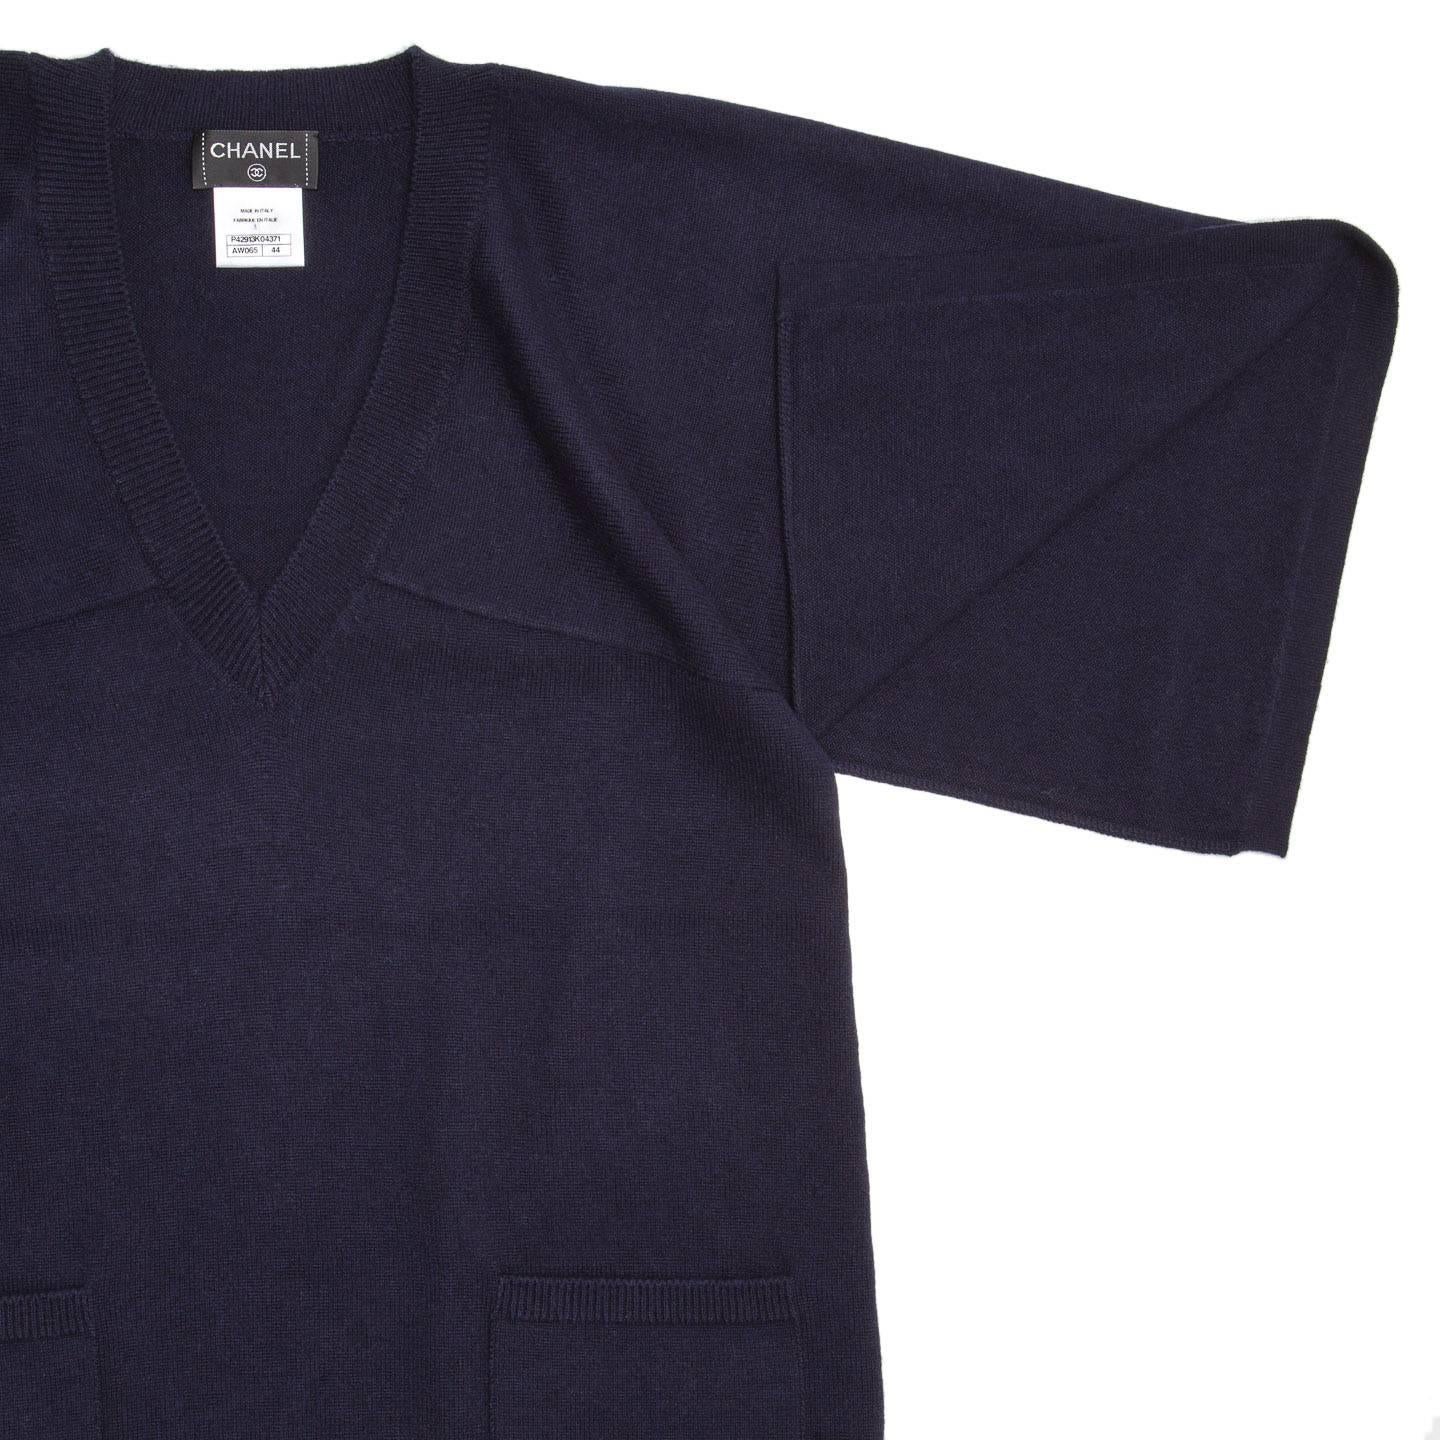 Chanel Navy Cashmere Short Kimono Style Sleeved Sweater In New Condition For Sale In Brooklyn, NY